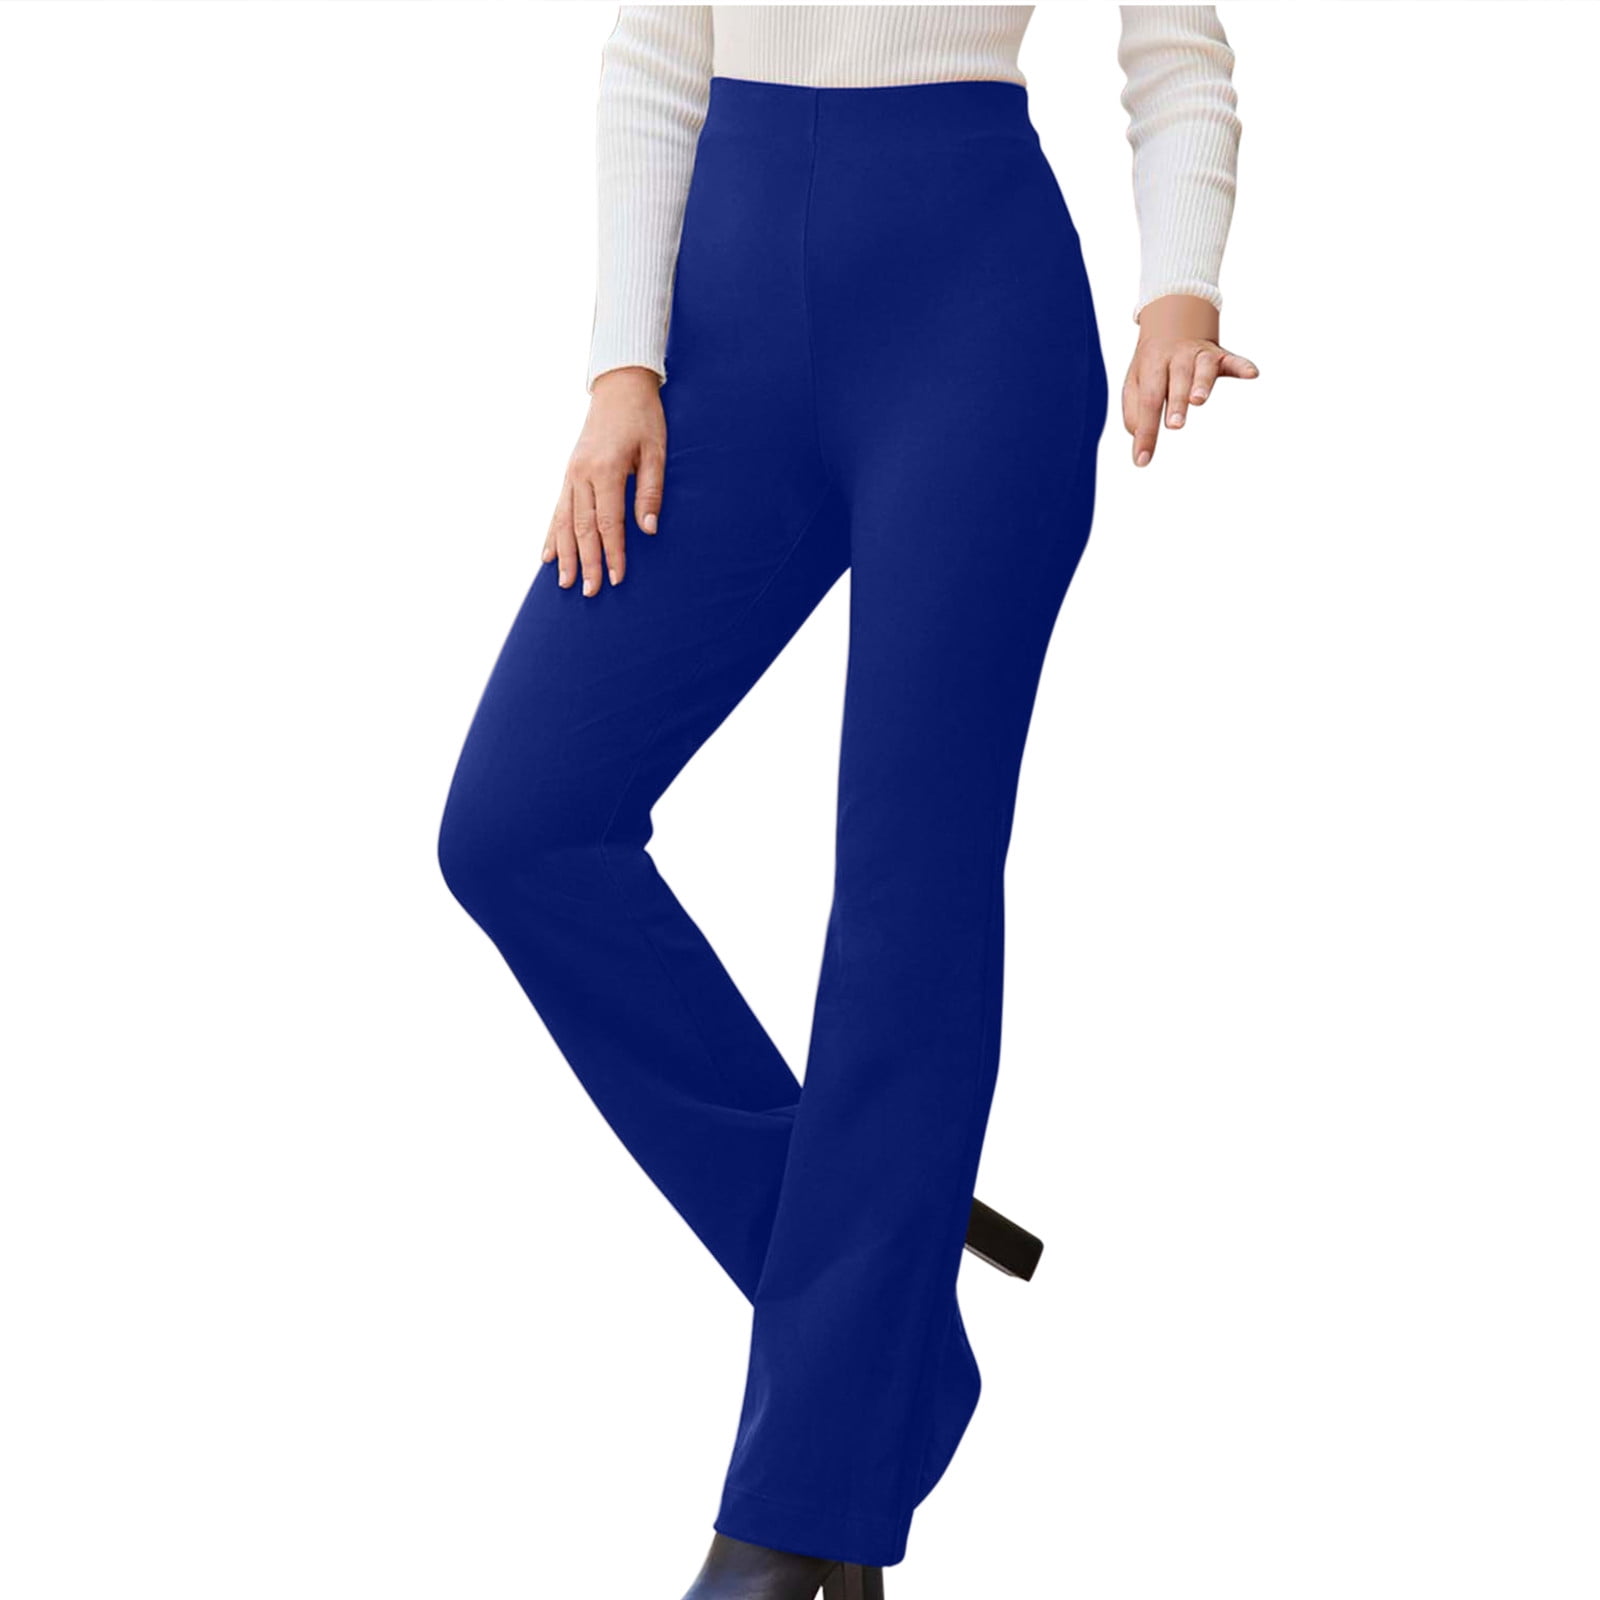 SSAAVKUY Womens Slim Fit Flare Solid Suit Pants Leisure Trousers  Bell-bottoms Solid Color Pants Comfy Holiday Cool Girl Dressy Fashion  Bottoms Blue 6